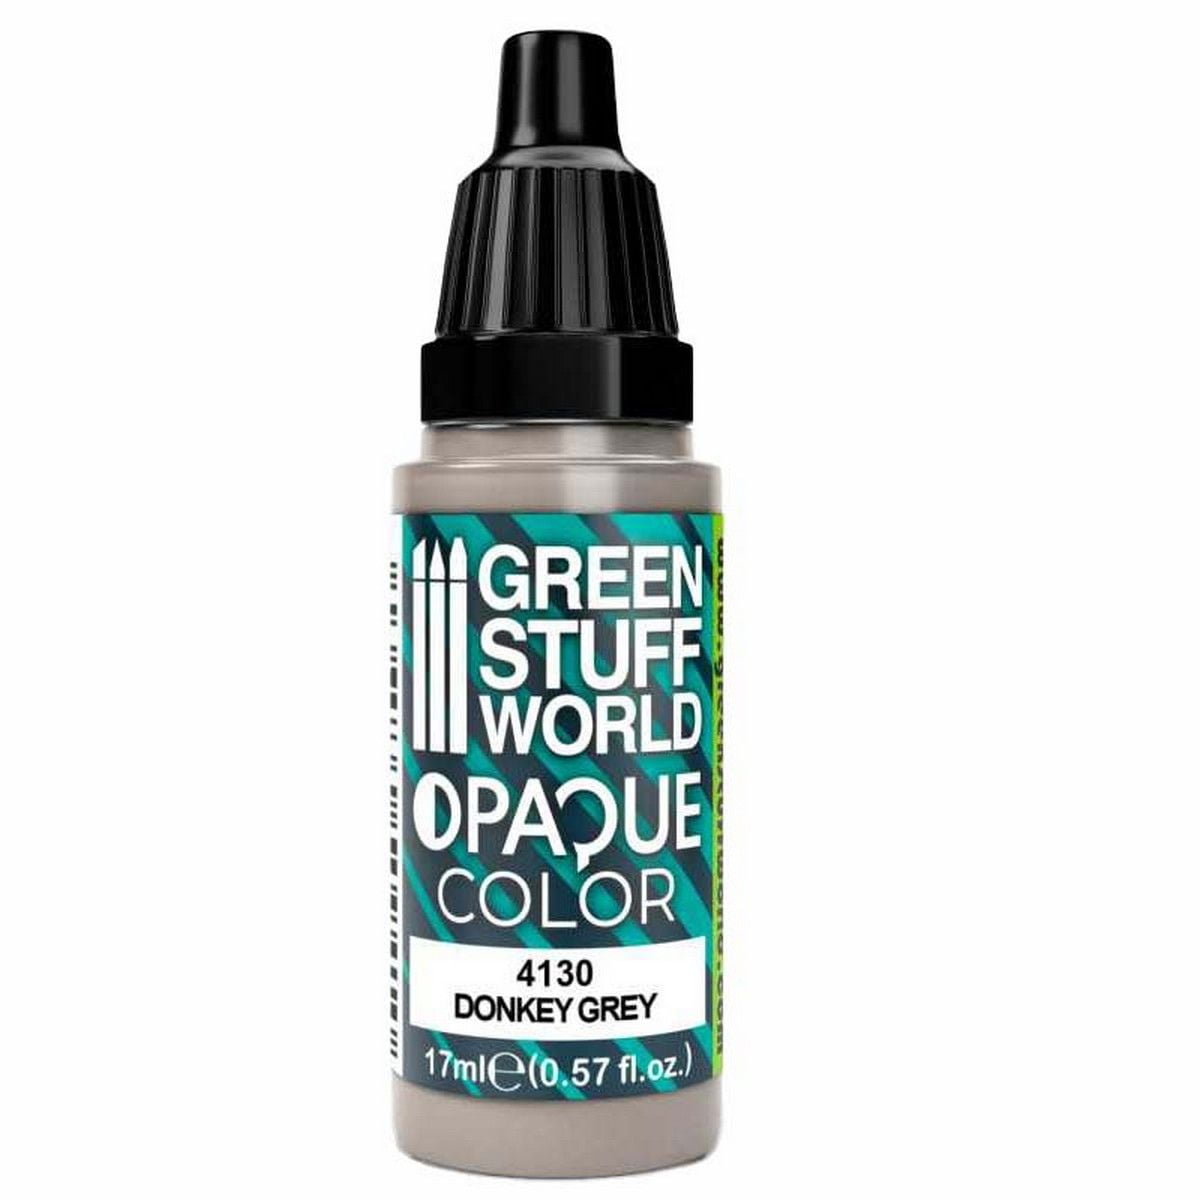 Opaque Colors - Donkey Grey - 17ml